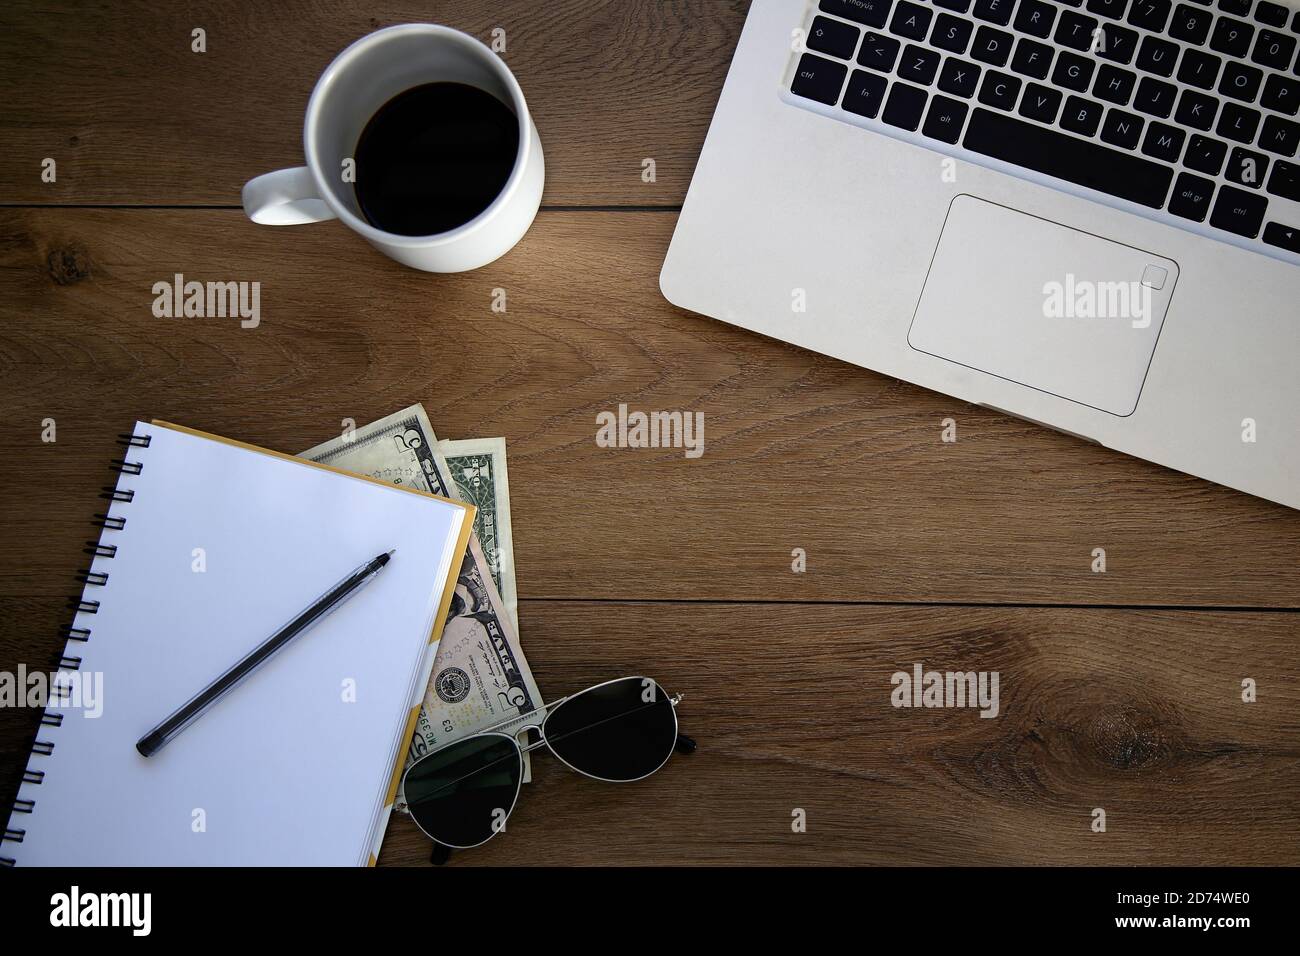 Top view of wooden desk with objects. Laptop, notebook, coffee cup, money, pen and sunglasses. Copy space. Stock Photo